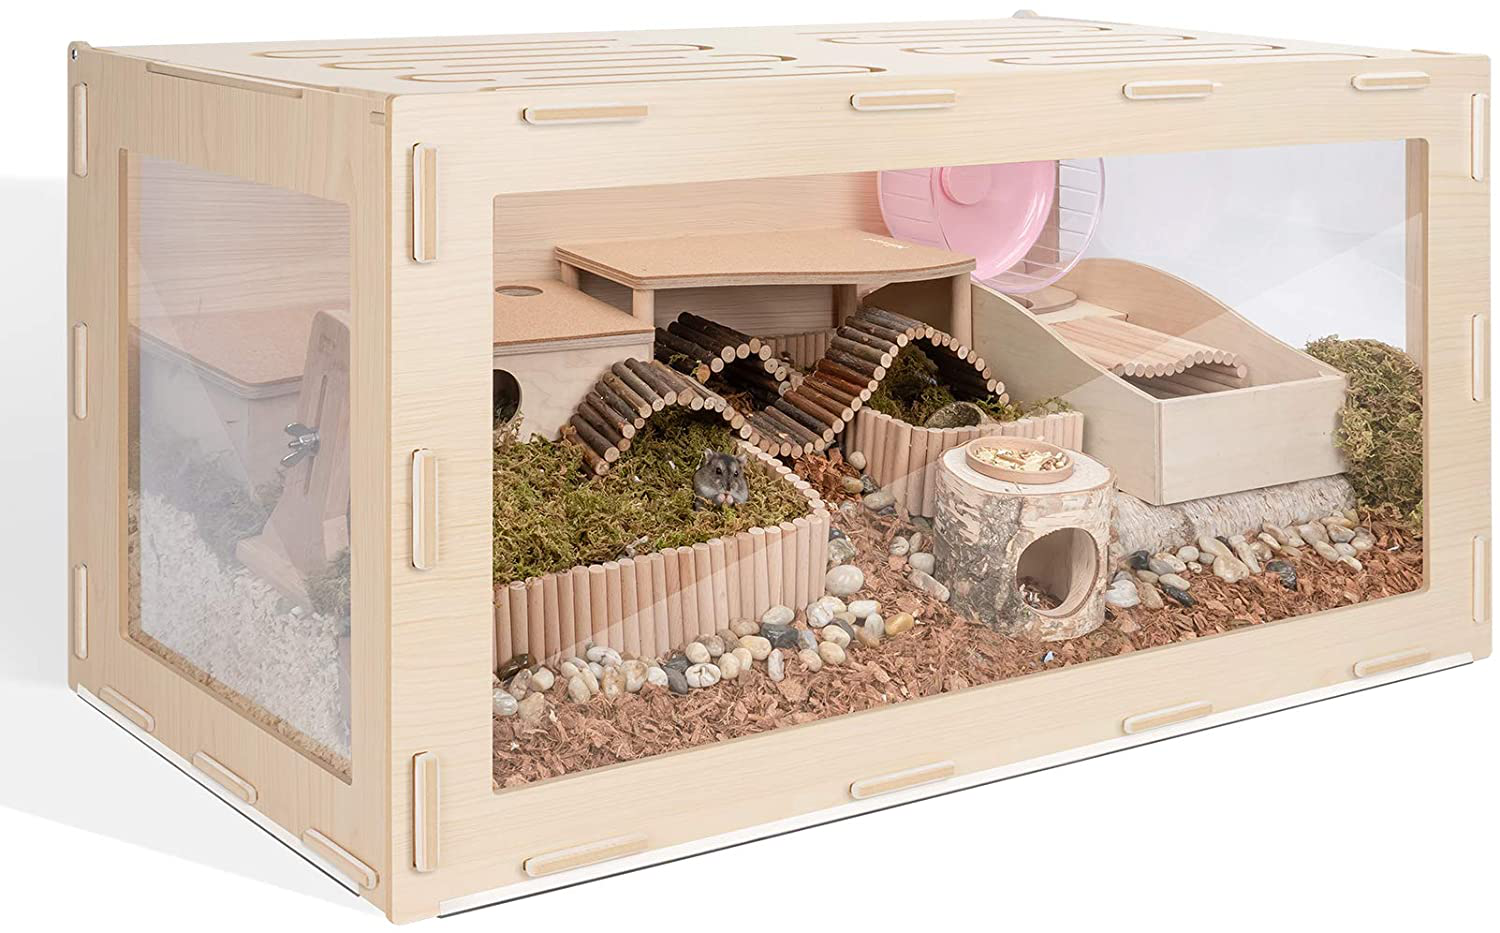 Niteangel Bigger World - MDF Aspen Small Animal Cage for Hamsters Degus Mices or Other Similar-Sized Pets Animals & Pet Supplies > Pet Supplies > Small Animal Supplies > Small Animal Habitats & Cages Niteangel Burlywood 39.4 x 19.7 x 19.7 inches 